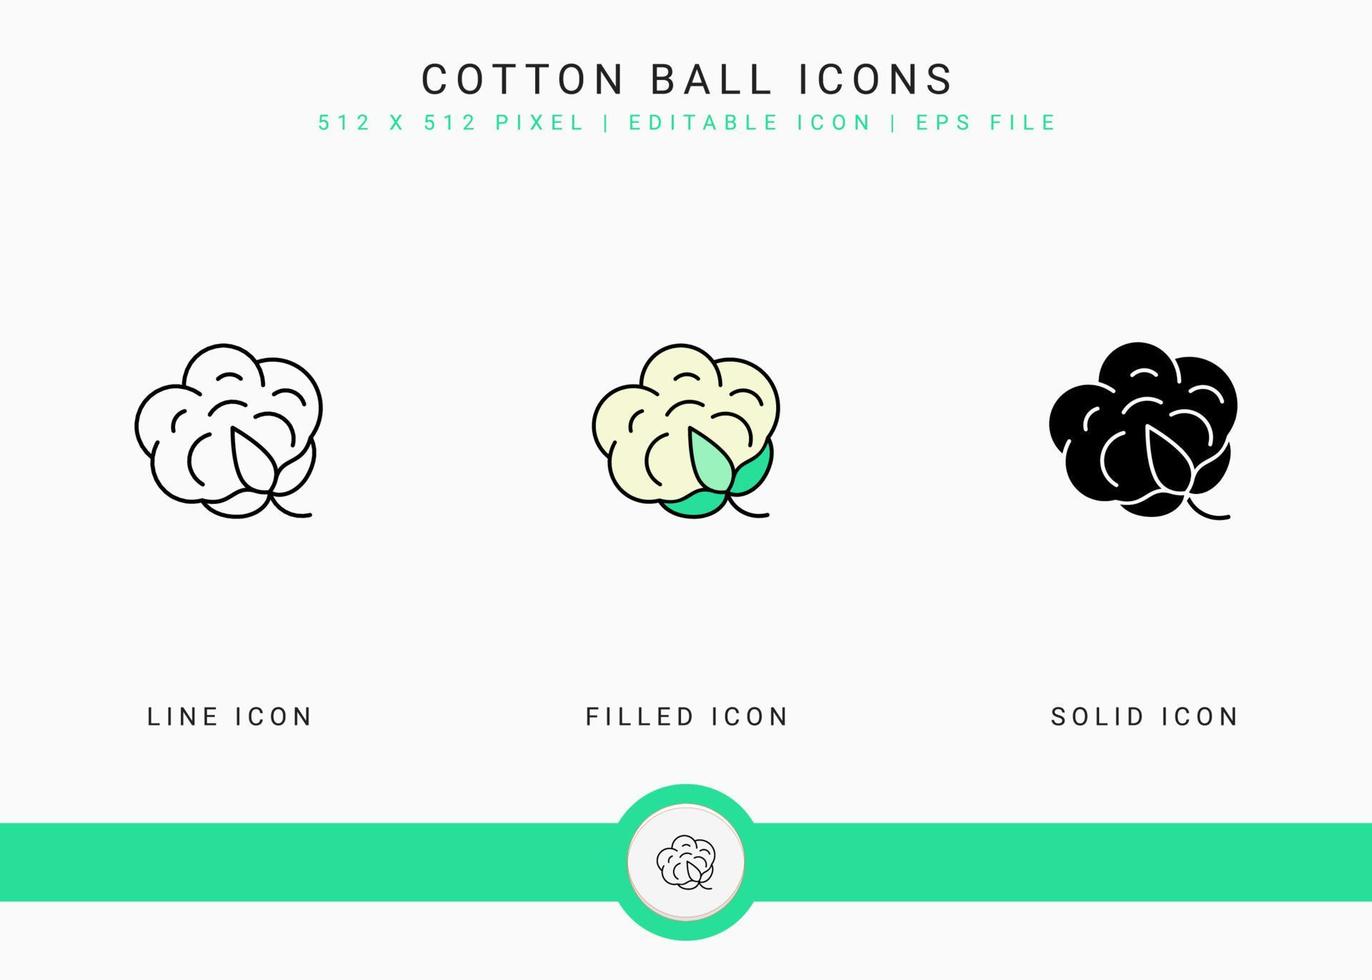 Cotton Ball icons set vector illustration with solid icon line style. Cotton Flower concept. Editable stroke icon on isolated background for web design, user interface, and mobile application